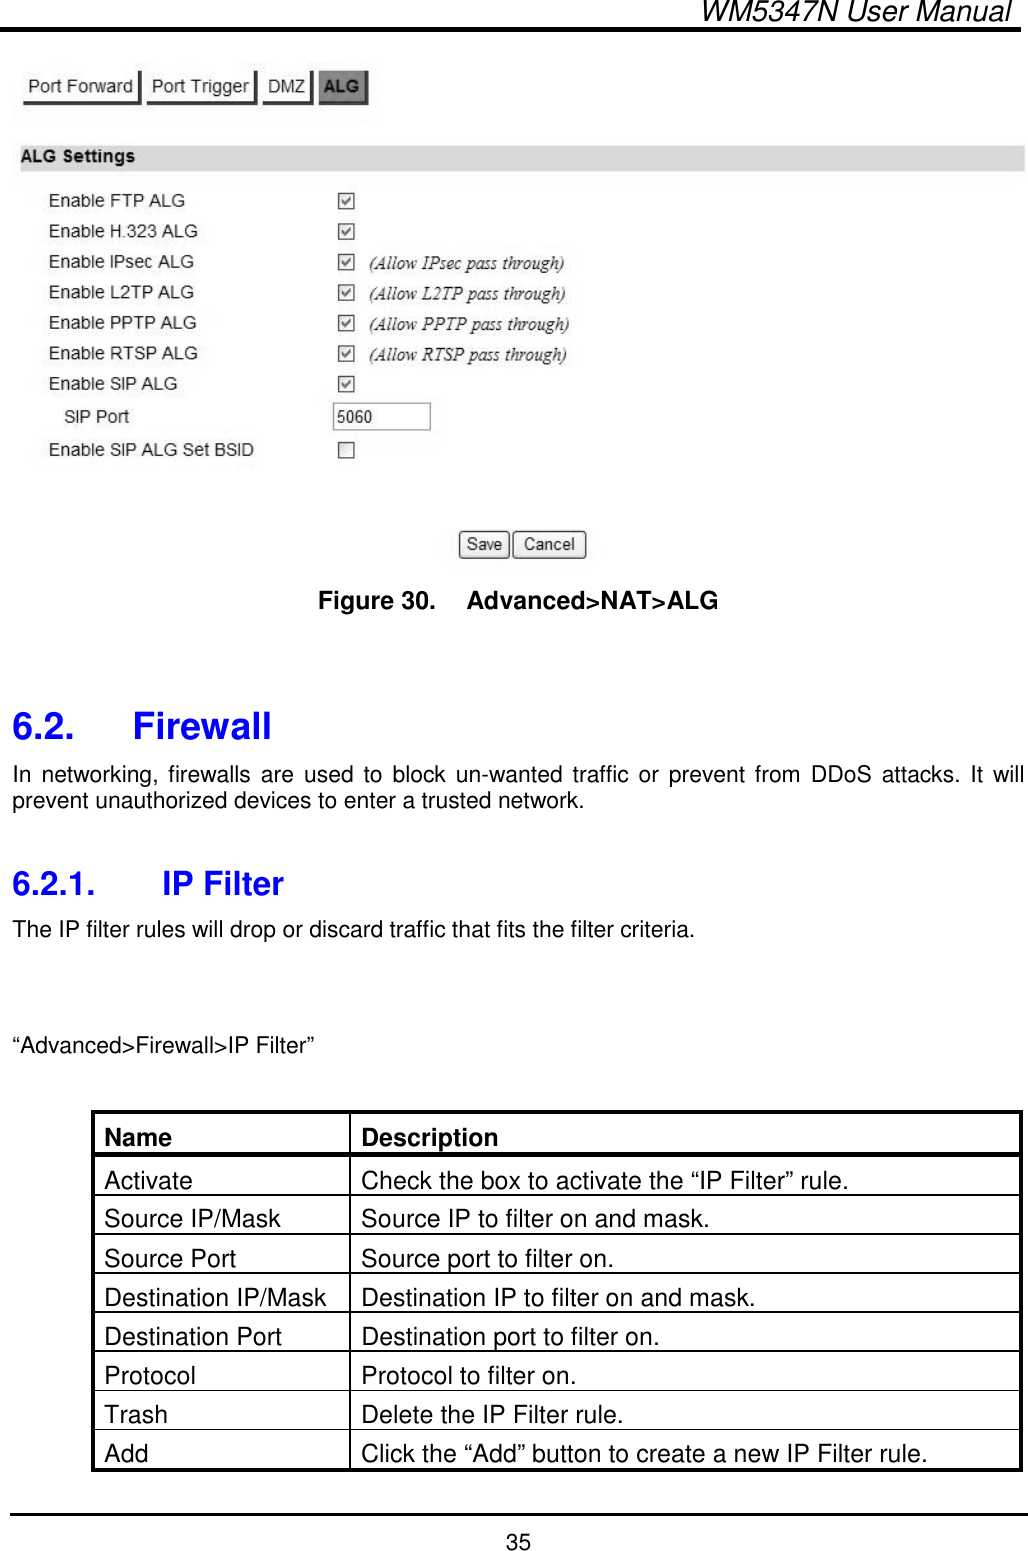  WM5347N User Manual  35  Figure 30.   Advanced&gt;NAT&gt;ALG   6.2.  Firewall In  networking, firewalls  are  used to  block  un-wanted traffic  or prevent from DDoS  attacks. It  will prevent unauthorized devices to enter a trusted network.  6.2.1.  IP Filter The IP filter rules will drop or discard traffic that fits the filter criteria.   “Advanced&gt;Firewall&gt;IP Filter”  Name  Description Activate  Check the box to activate the “IP Filter” rule. Source IP/Mask  Source IP to filter on and mask. Source Port  Source port to filter on. Destination IP/Mask  Destination IP to filter on and mask. Destination Port  Destination port to filter on. Protocol  Protocol to filter on. Trash  Delete the IP Filter rule. Add  Click the “Add” button to create a new IP Filter rule. 